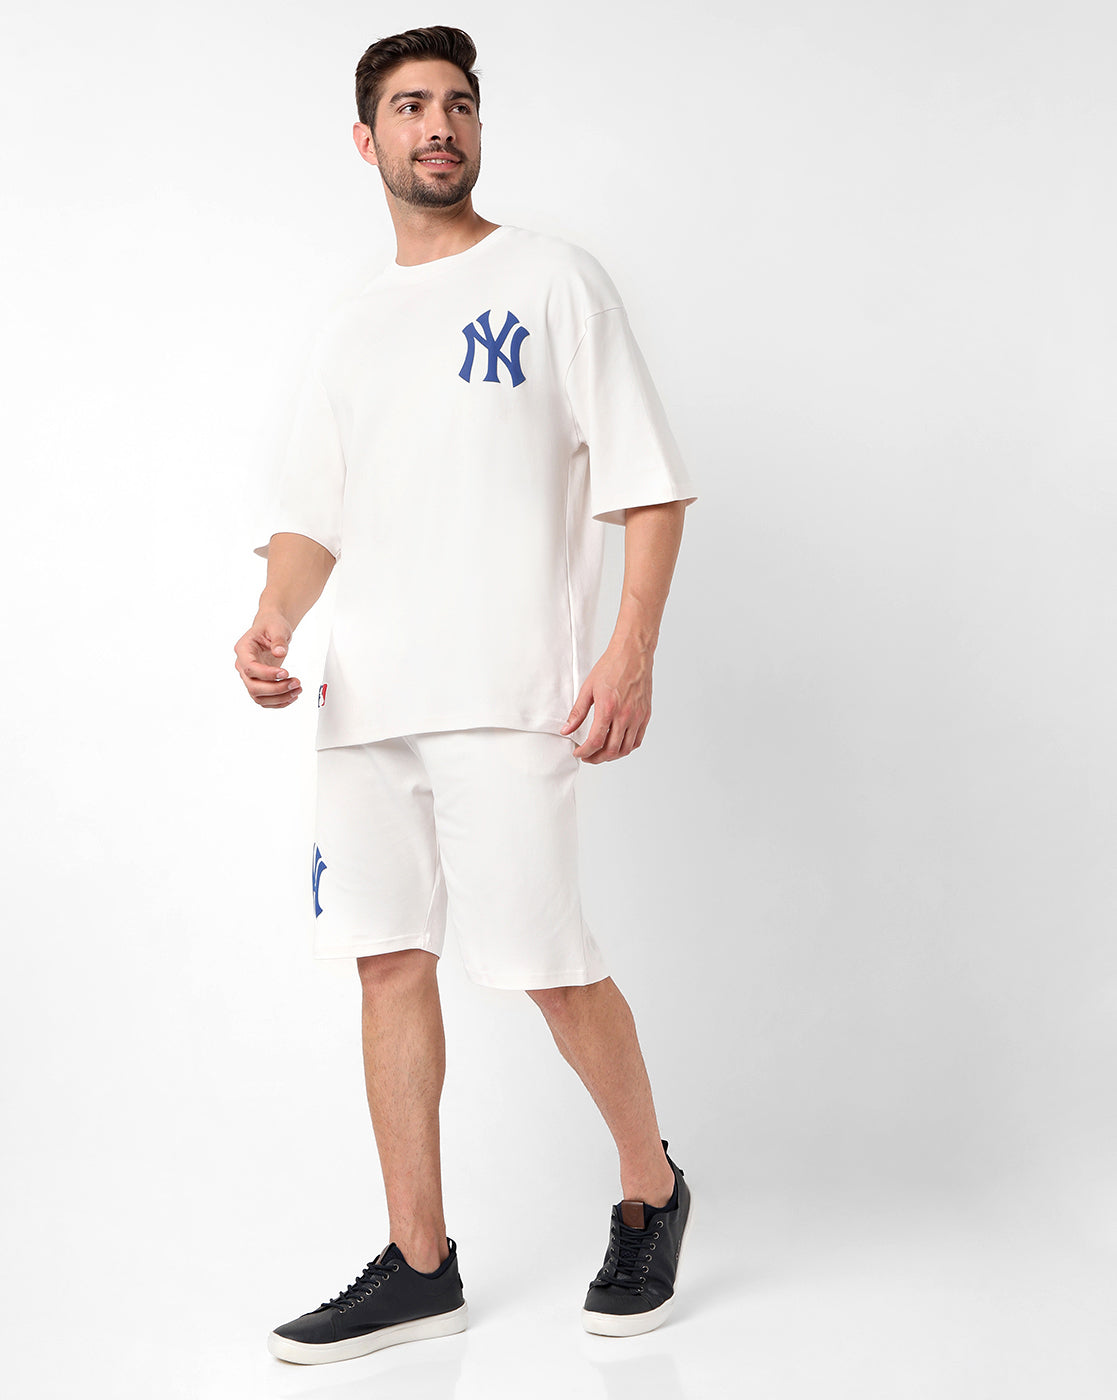 Off-White NY Drop Shoulder Basketball Co-ords